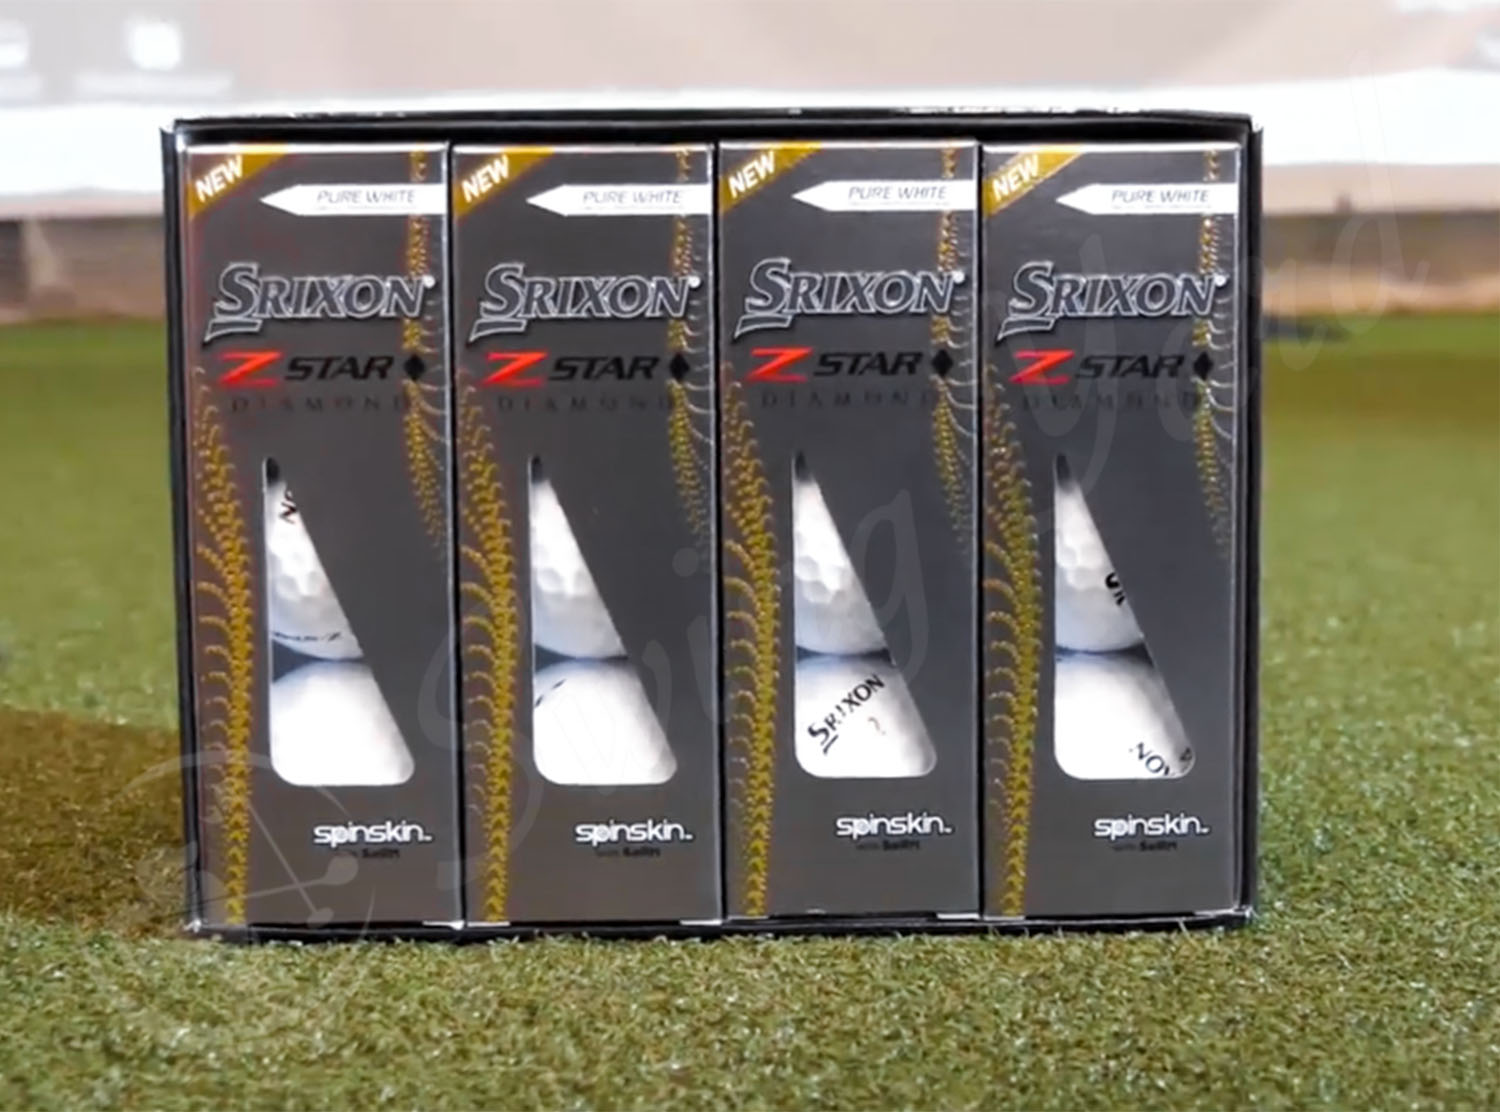 A box of Srixon Z-Star in the grass at the golf course